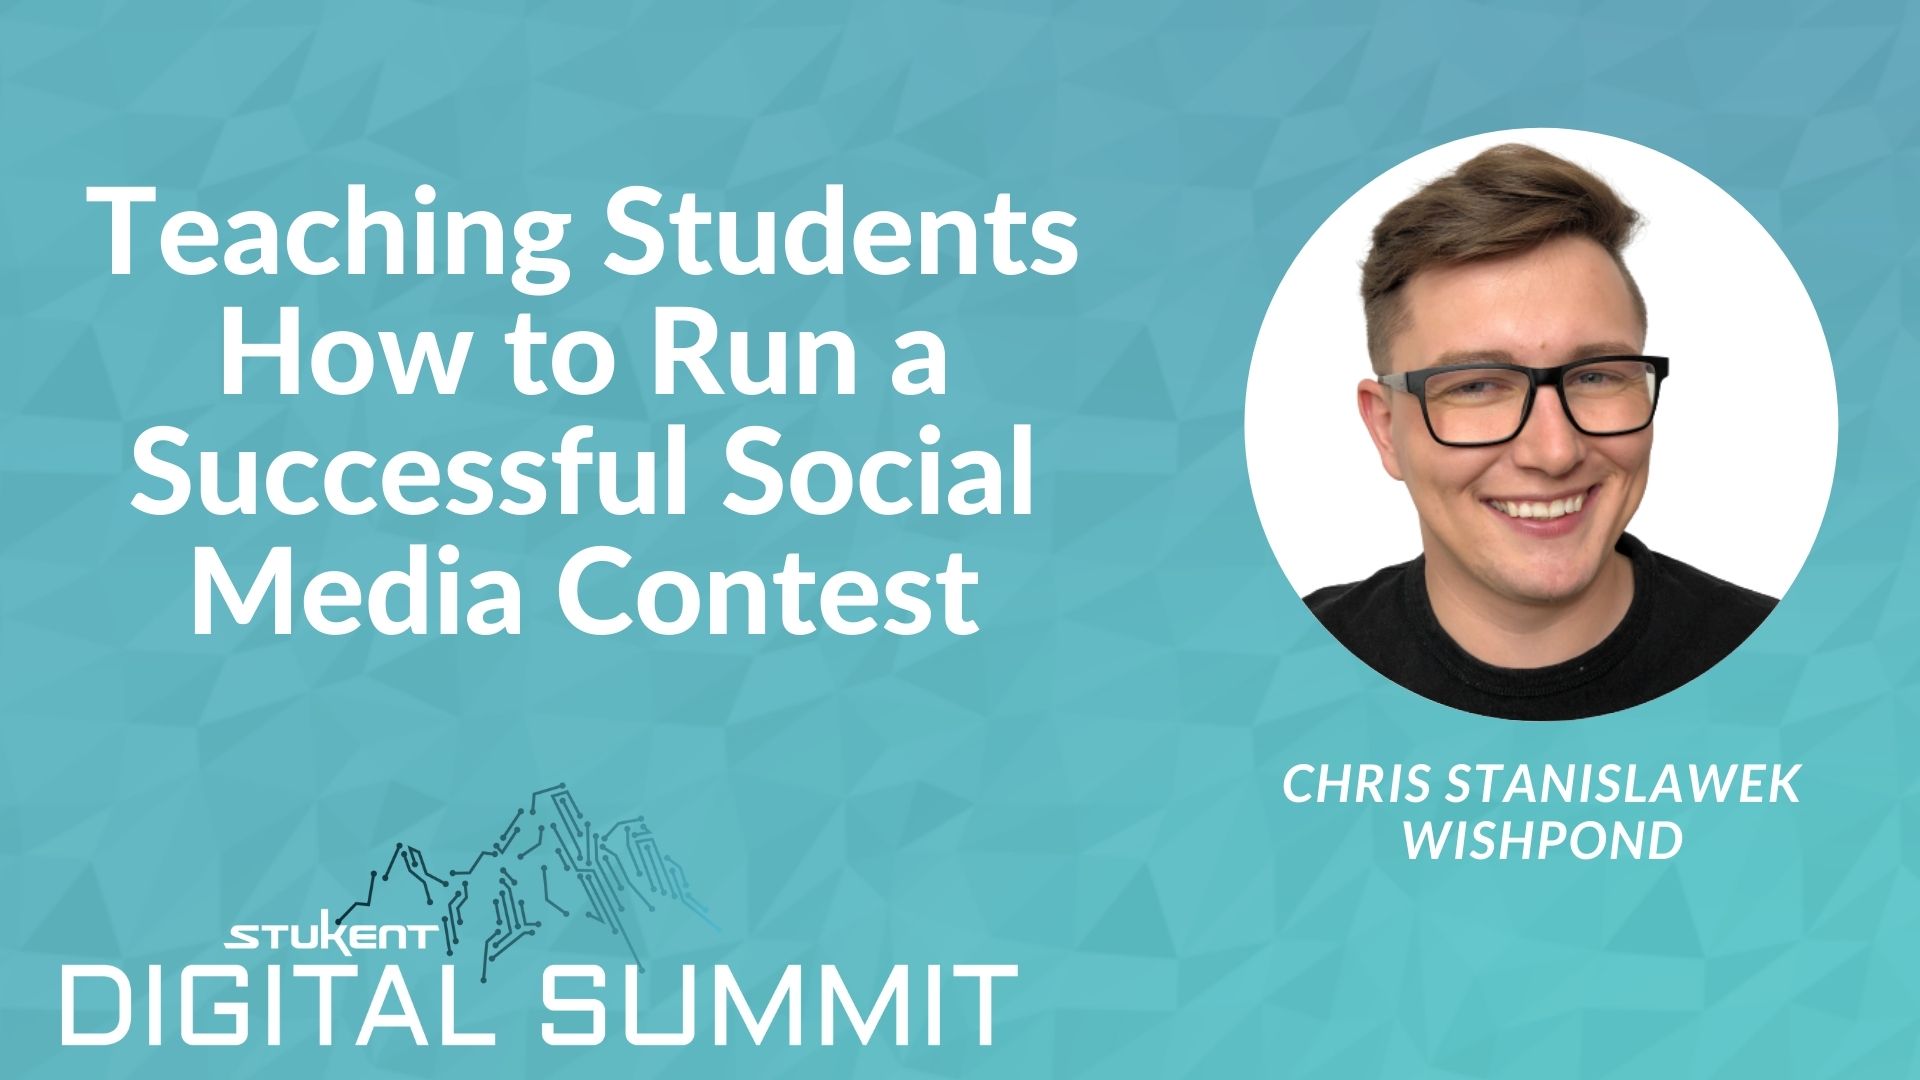 Teaching Students How to Run a Successful Social Media Contest